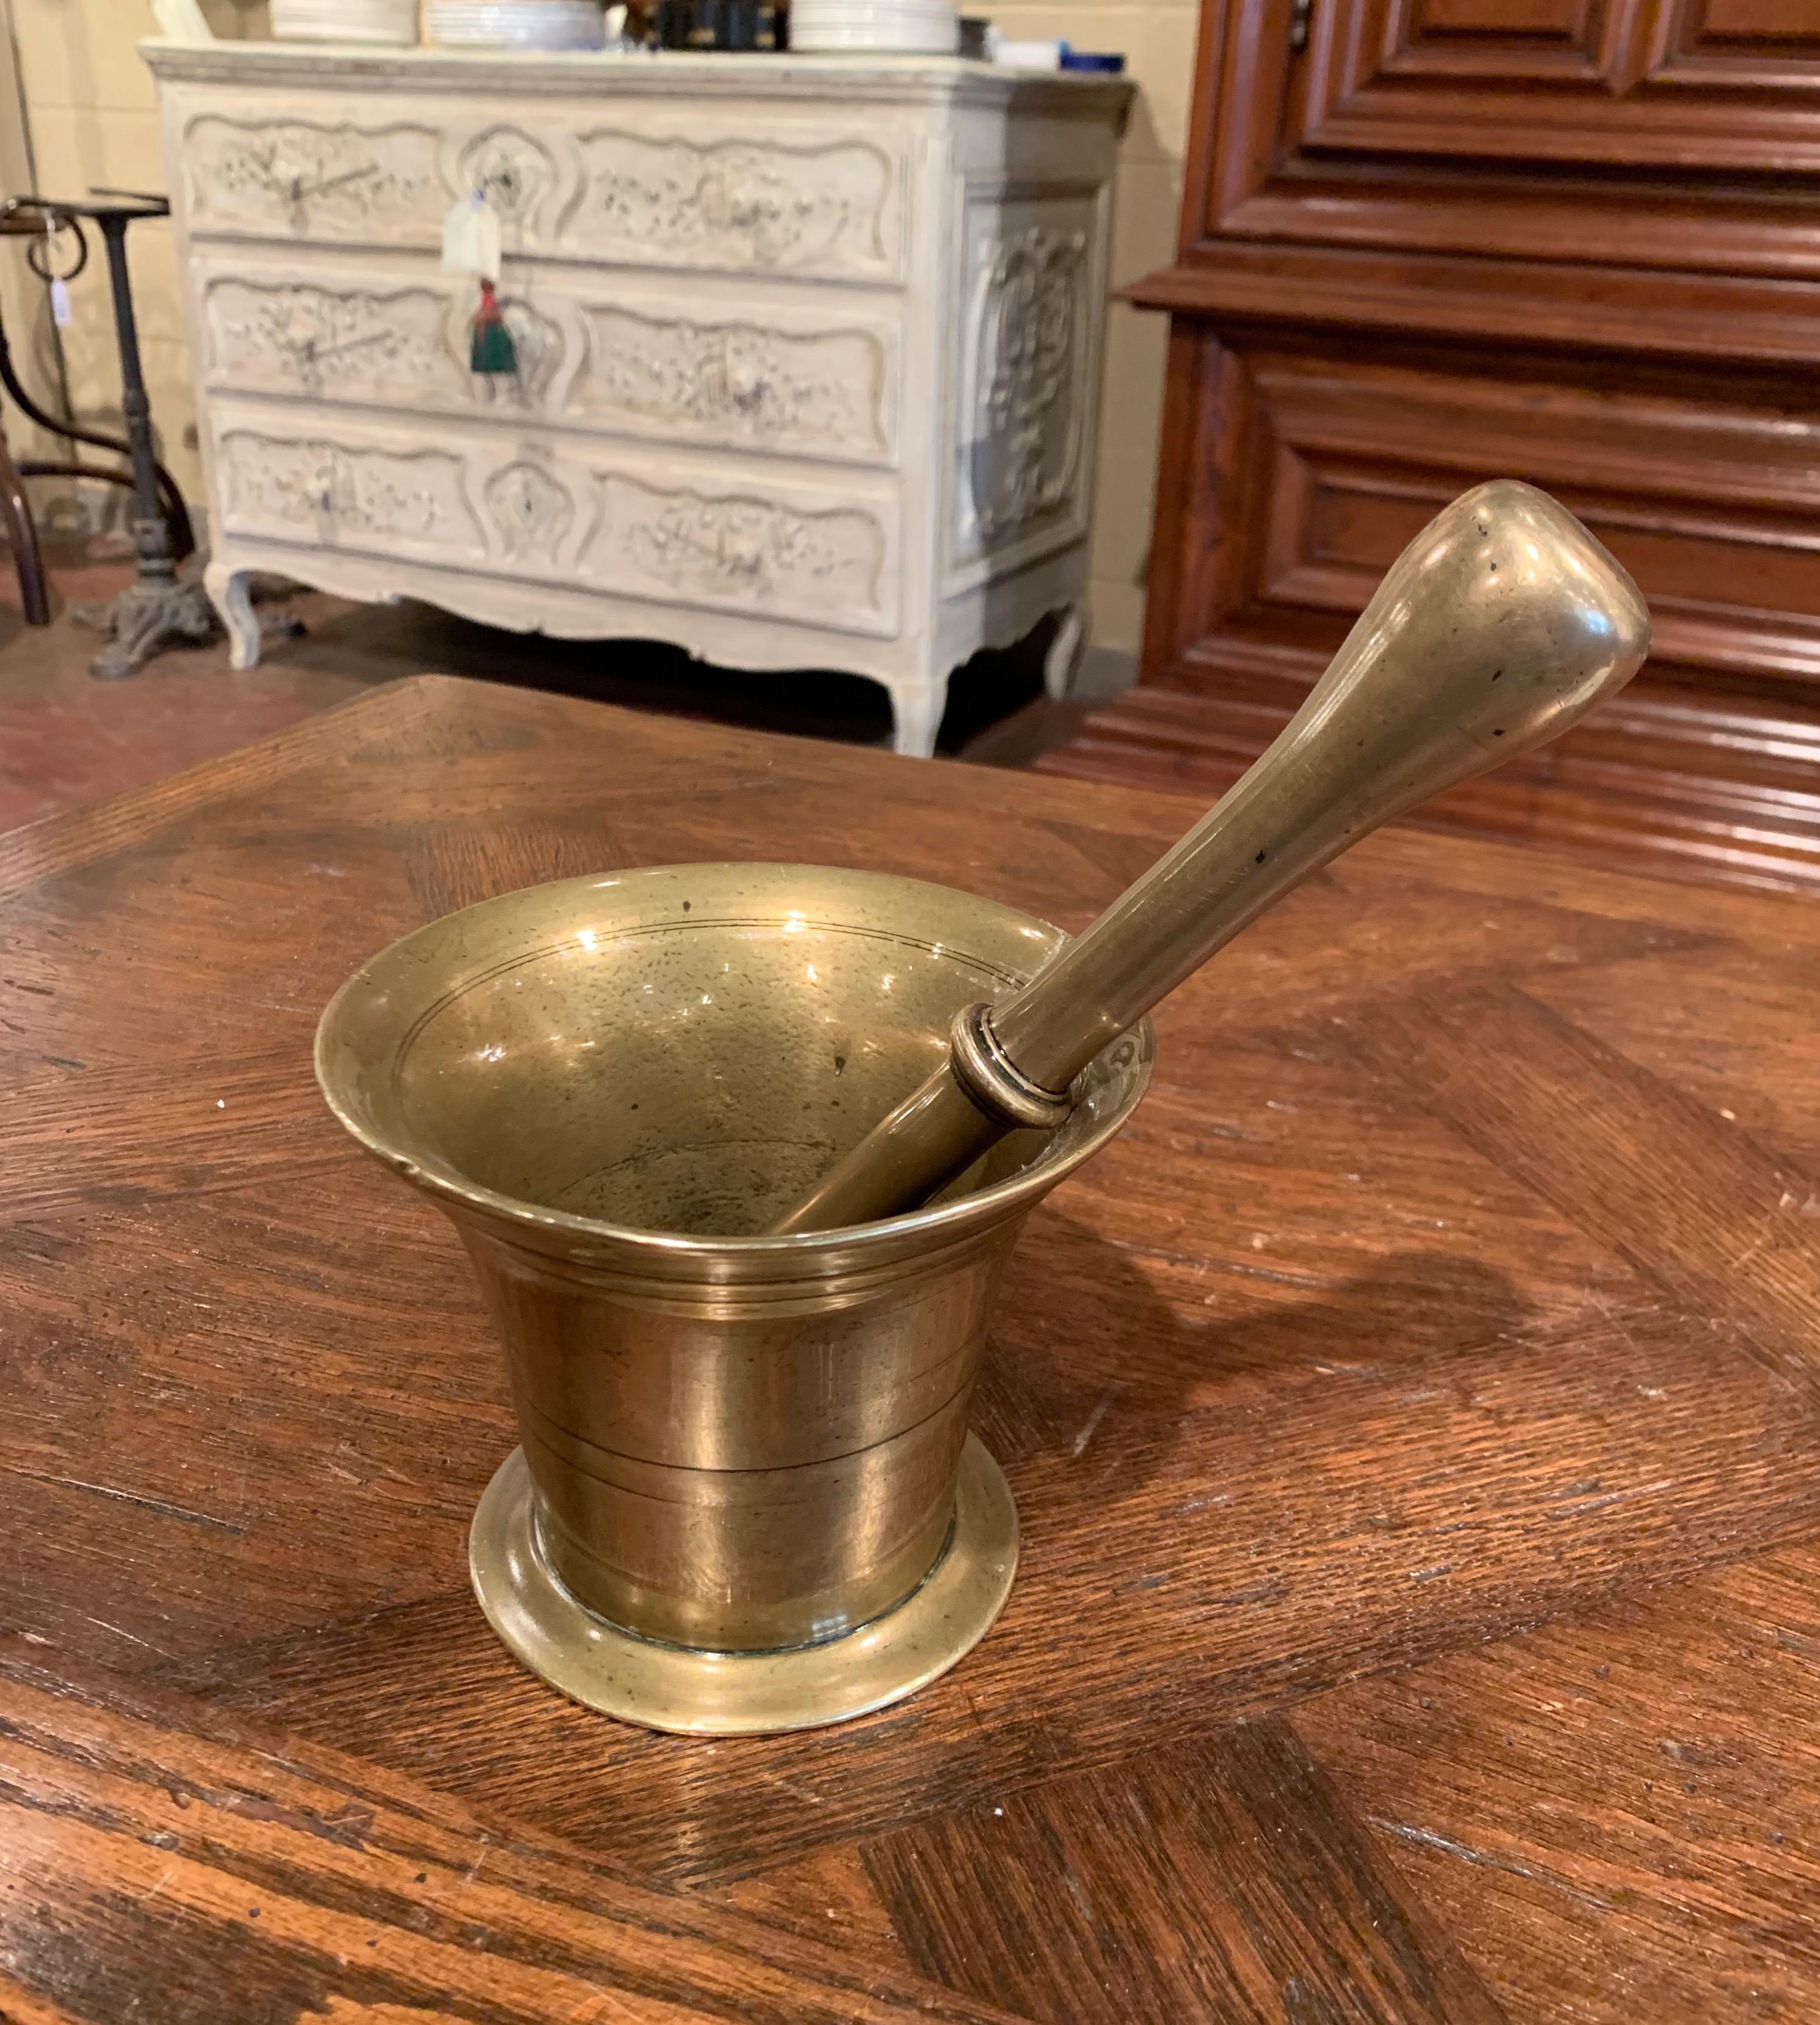 Grind spices in your kitchen with this beautifully carved, antique mortar; crafted in France, circa 1860, and made of bronze, the decorative bowl is round in shape with a wide mouth at the top. The kitchen essential is in excellent condition with